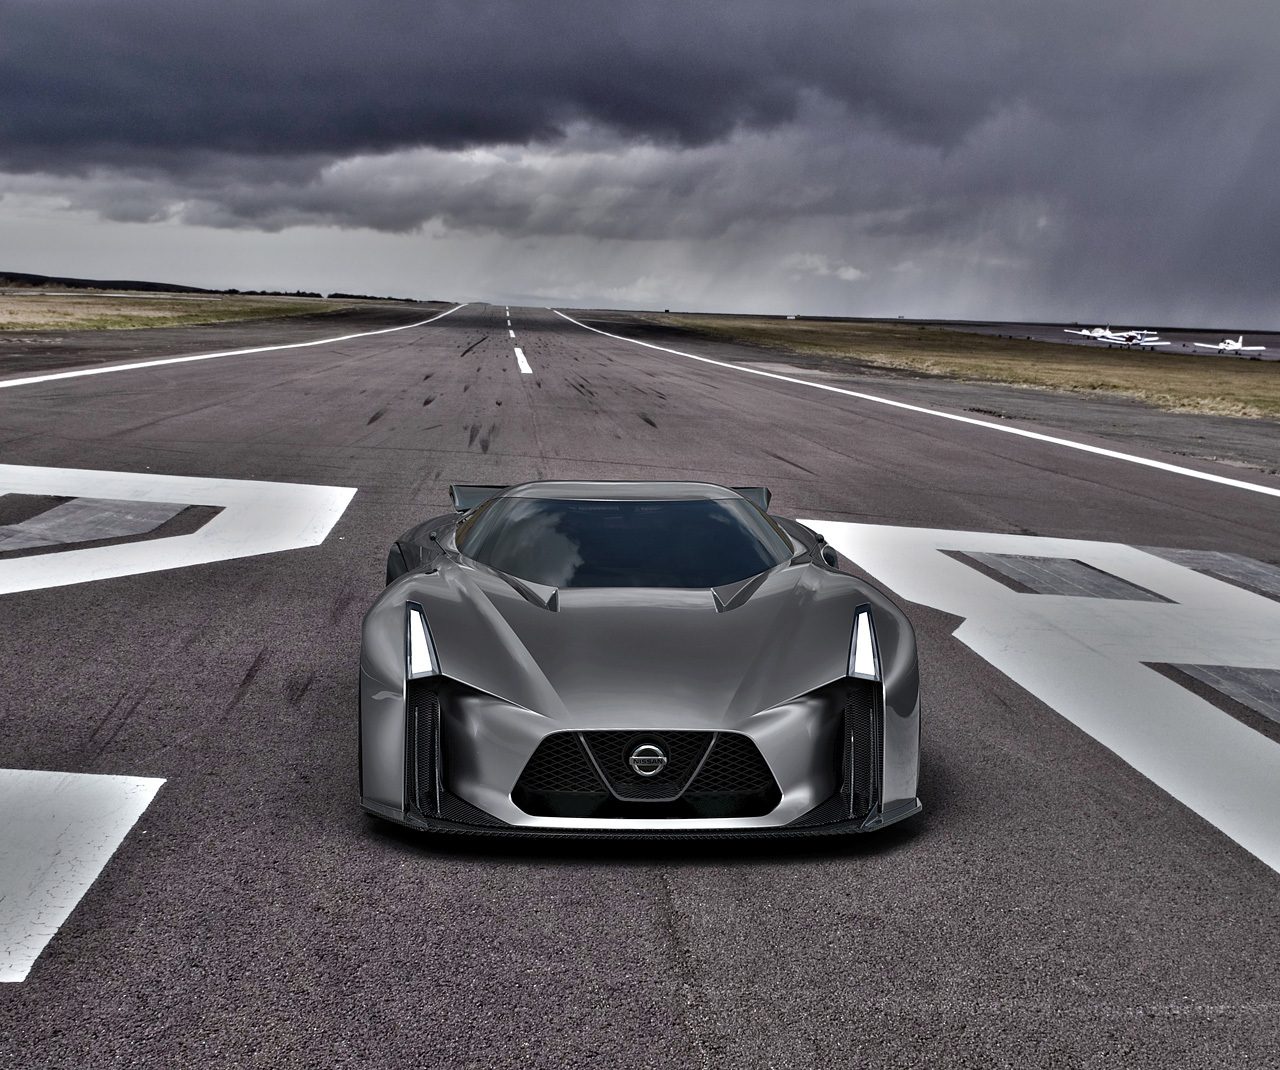 R36 GT-R Expected to be “Toned Down” Version of Nissan Vision Gran